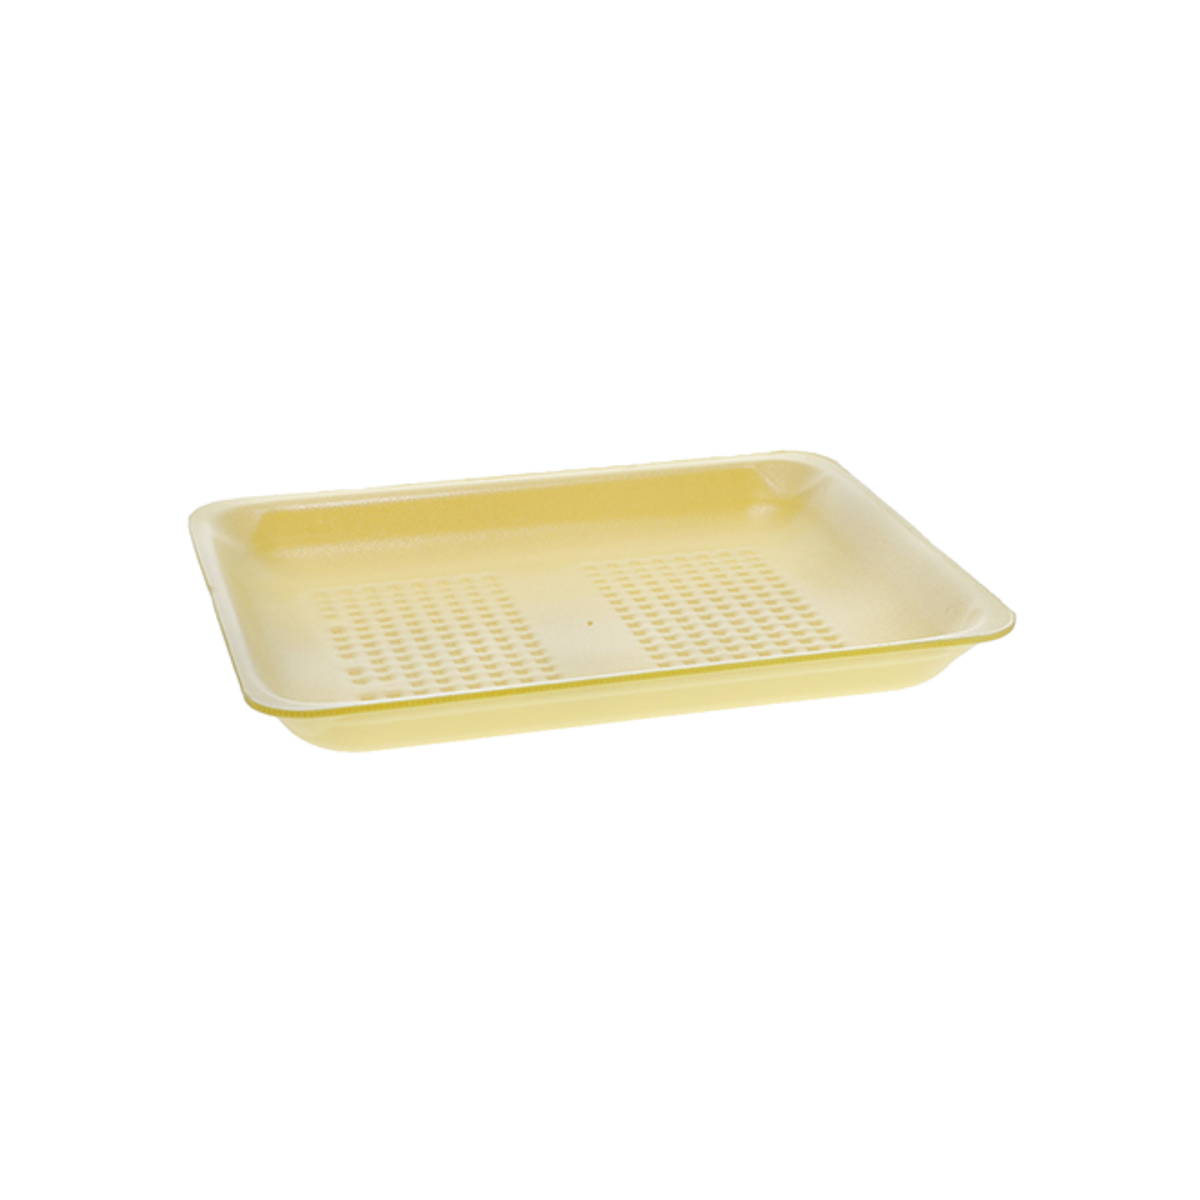 Pactiv 17S Disposable Foam Meat Tray - 8 19/50L x 3 1/2W x 17